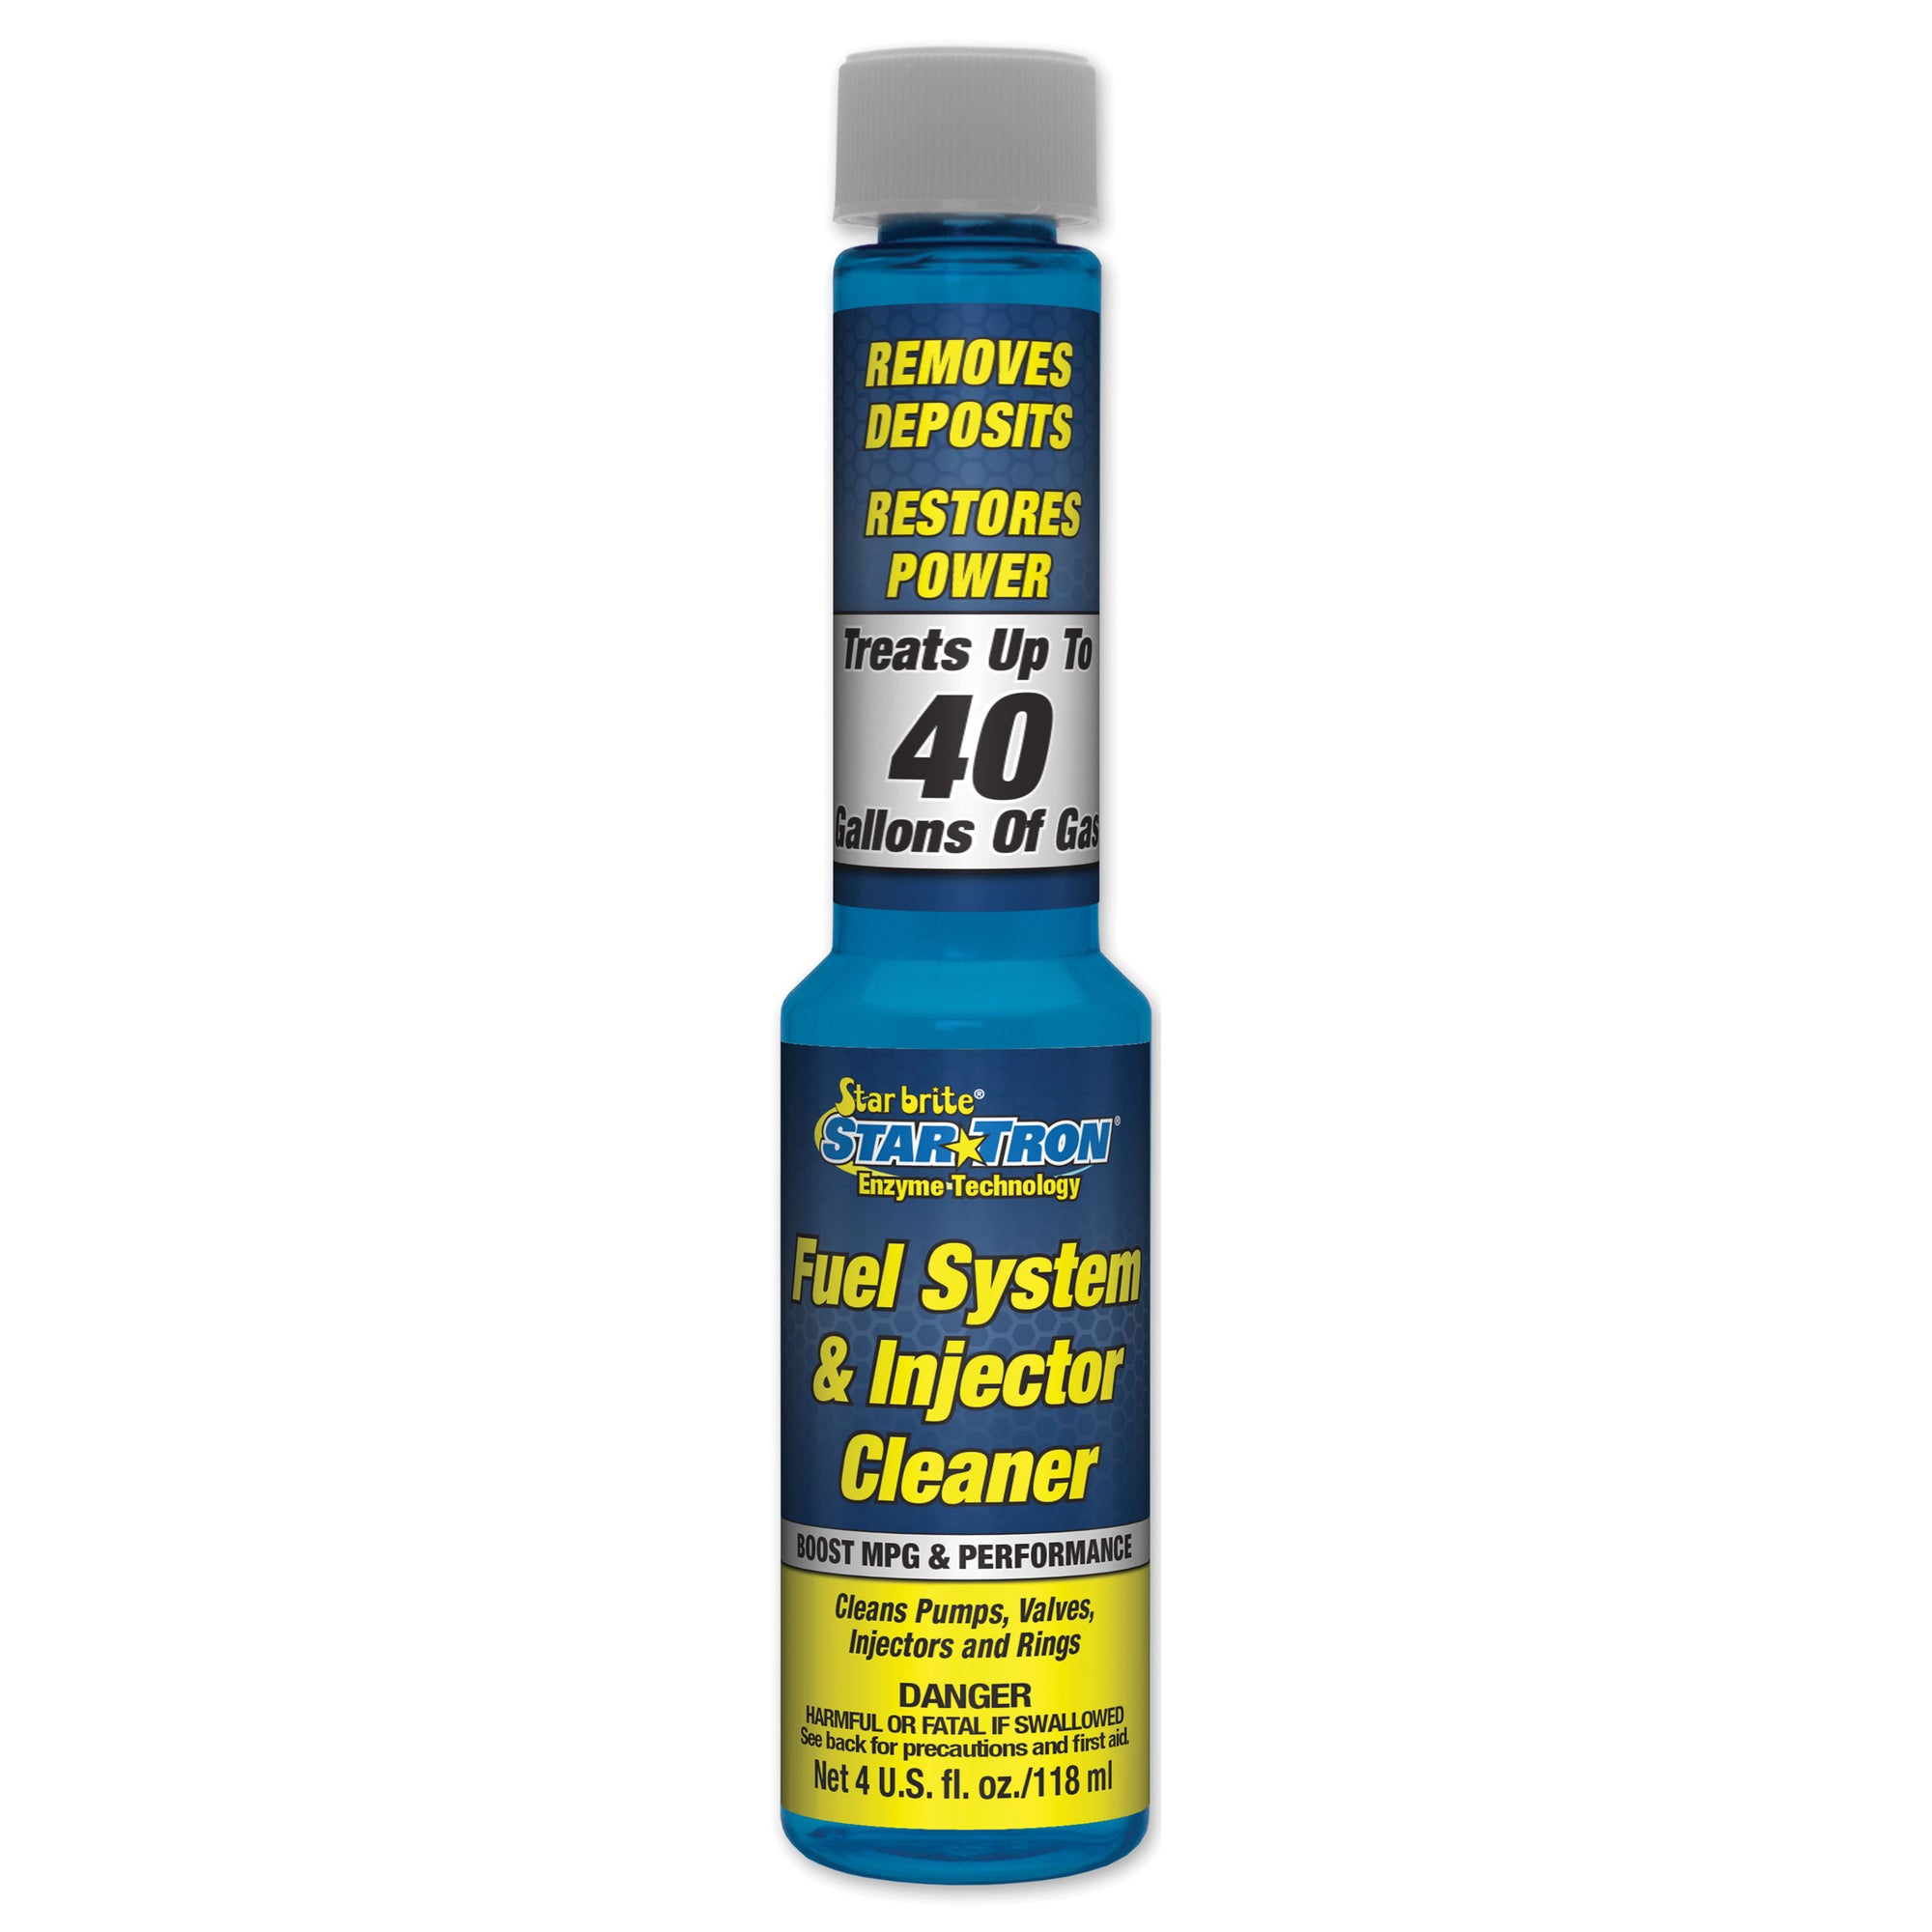 Star brite 096604 Star Tron Fuel System and Injector Cleaner - 4 oz